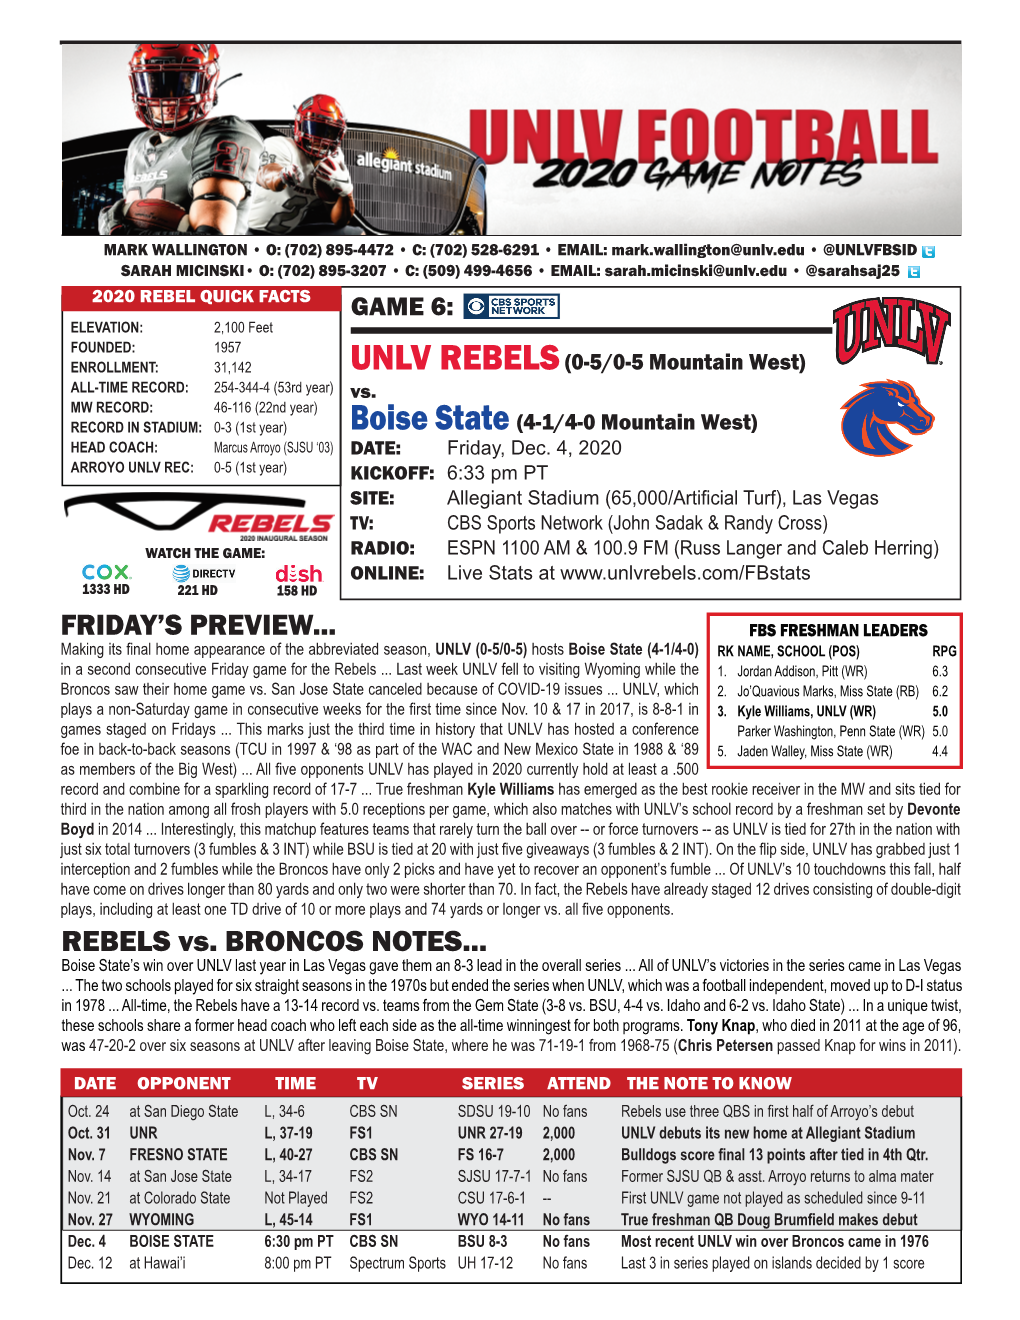 FRIDAY's PREVIEW... REBELS Vs. BRONCOS NOTES